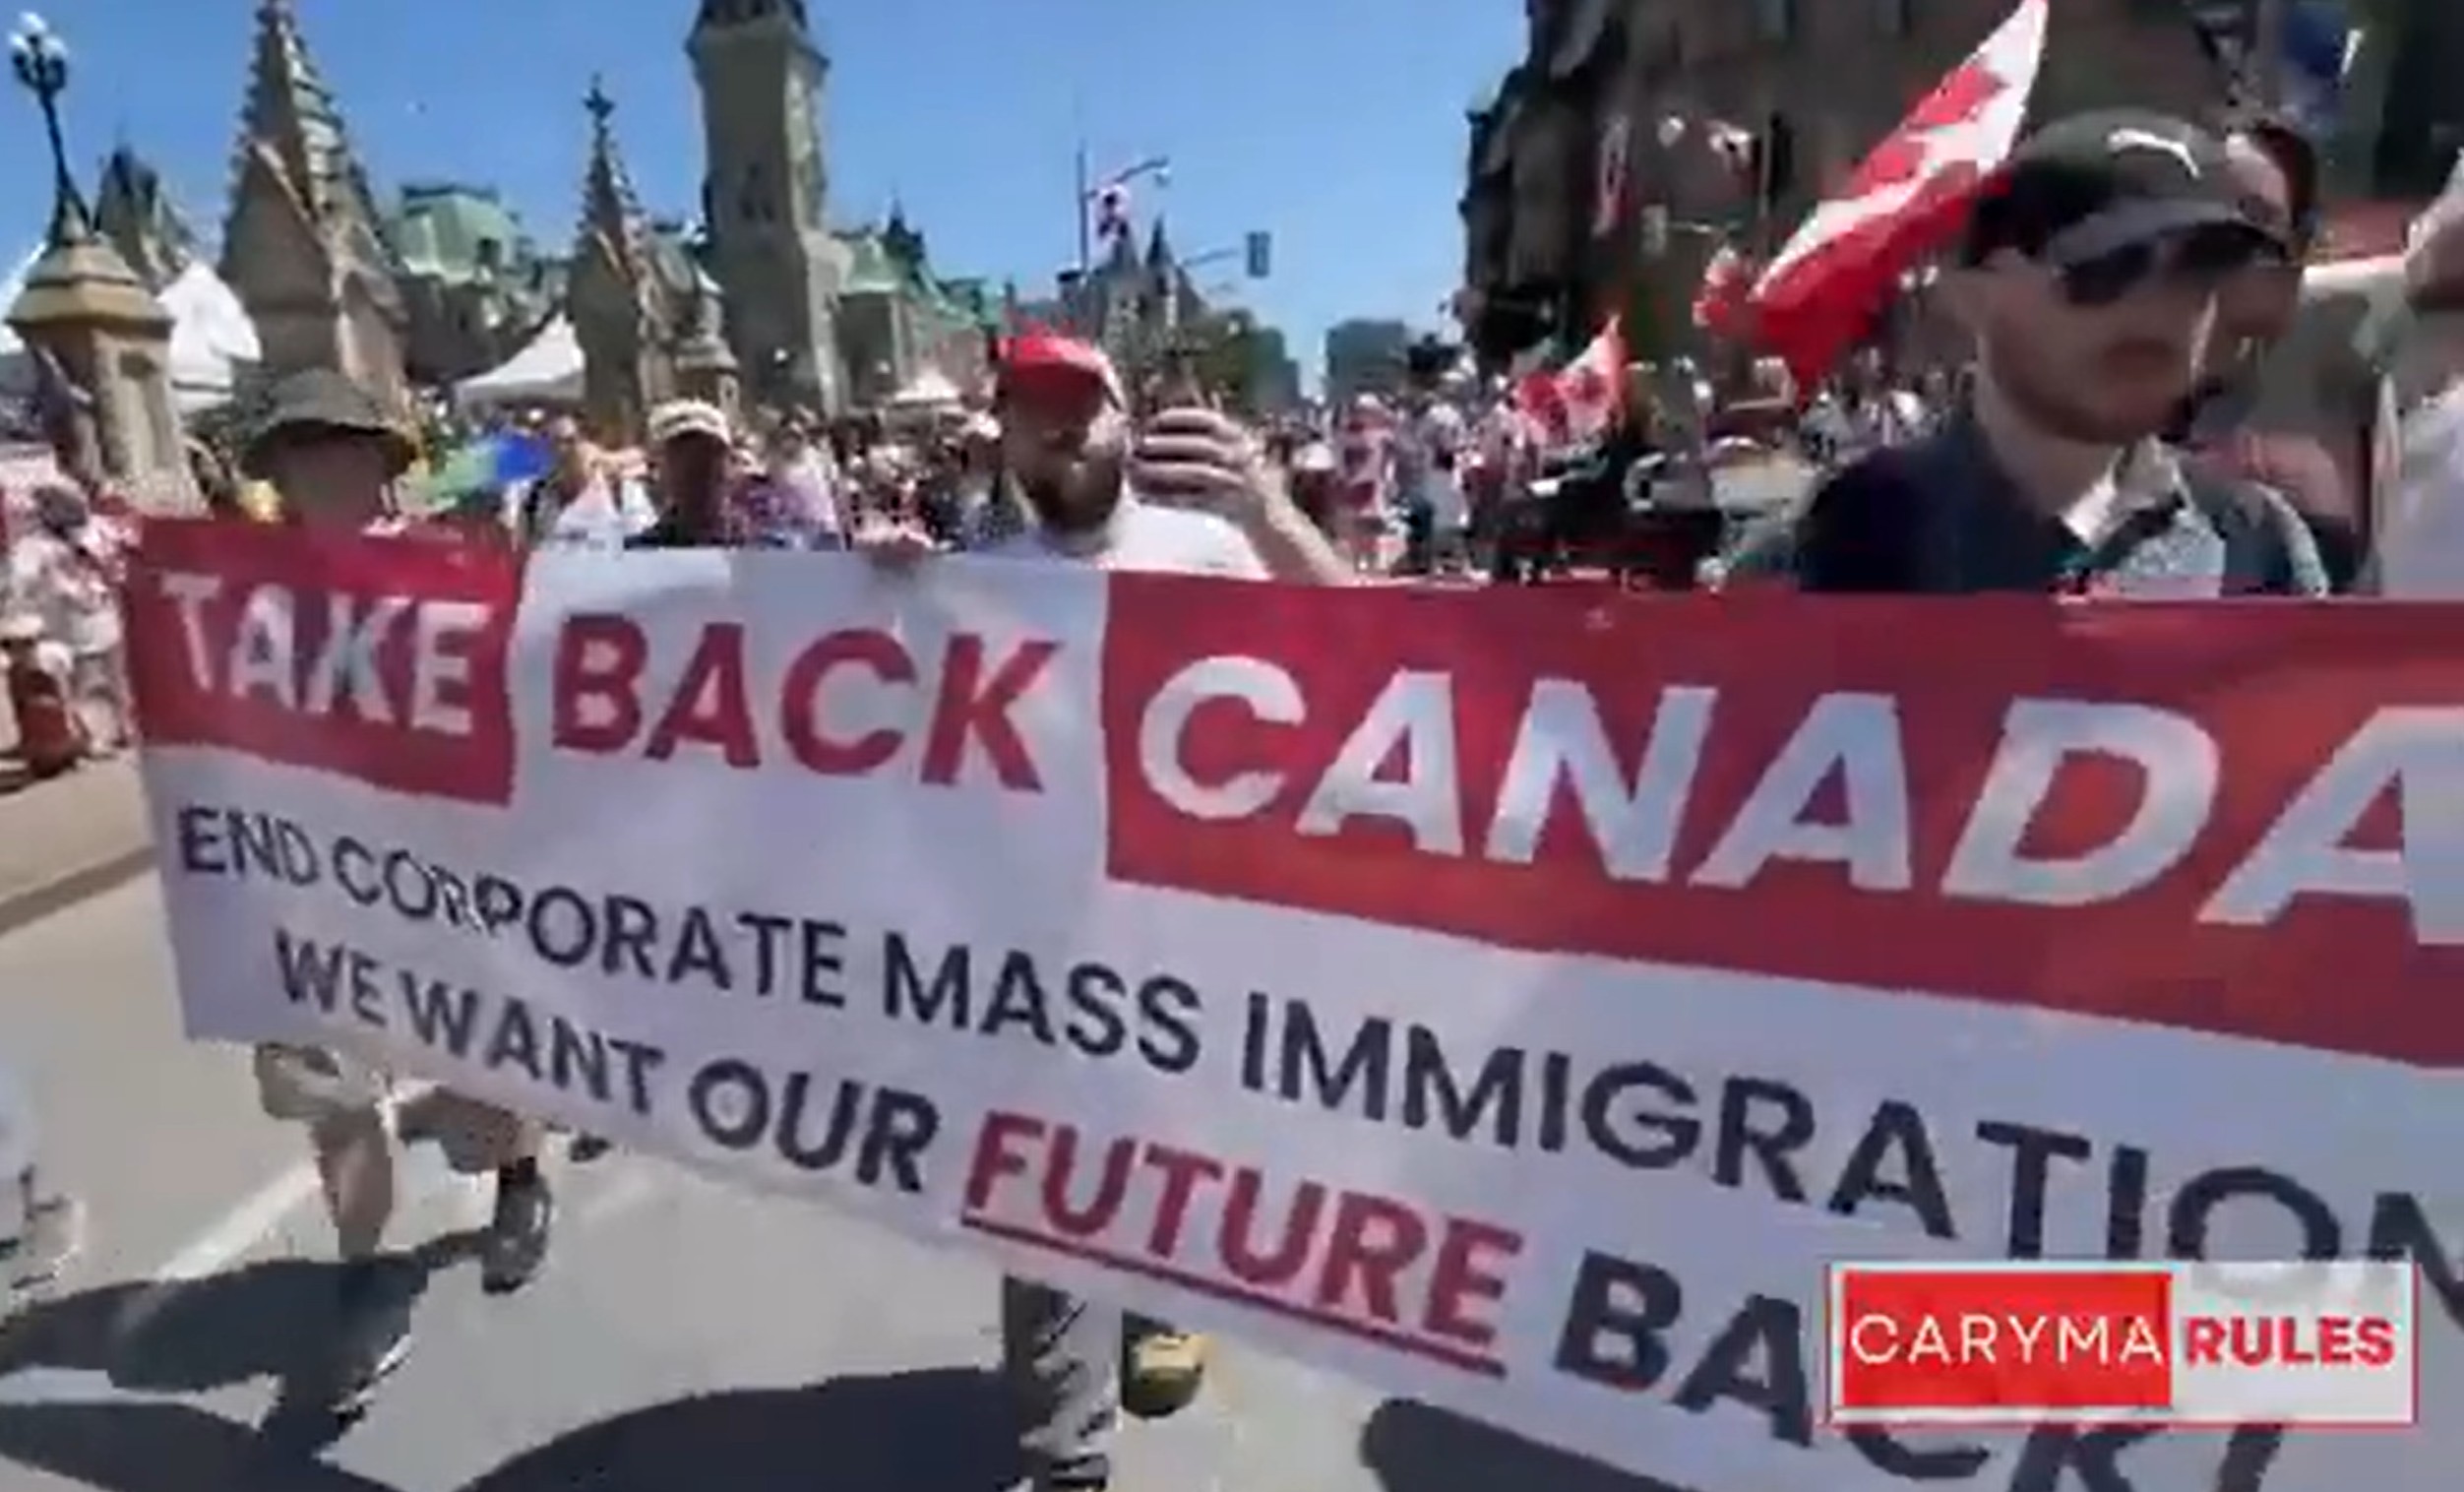 Ottawa’s Canada Day celebrations and protests